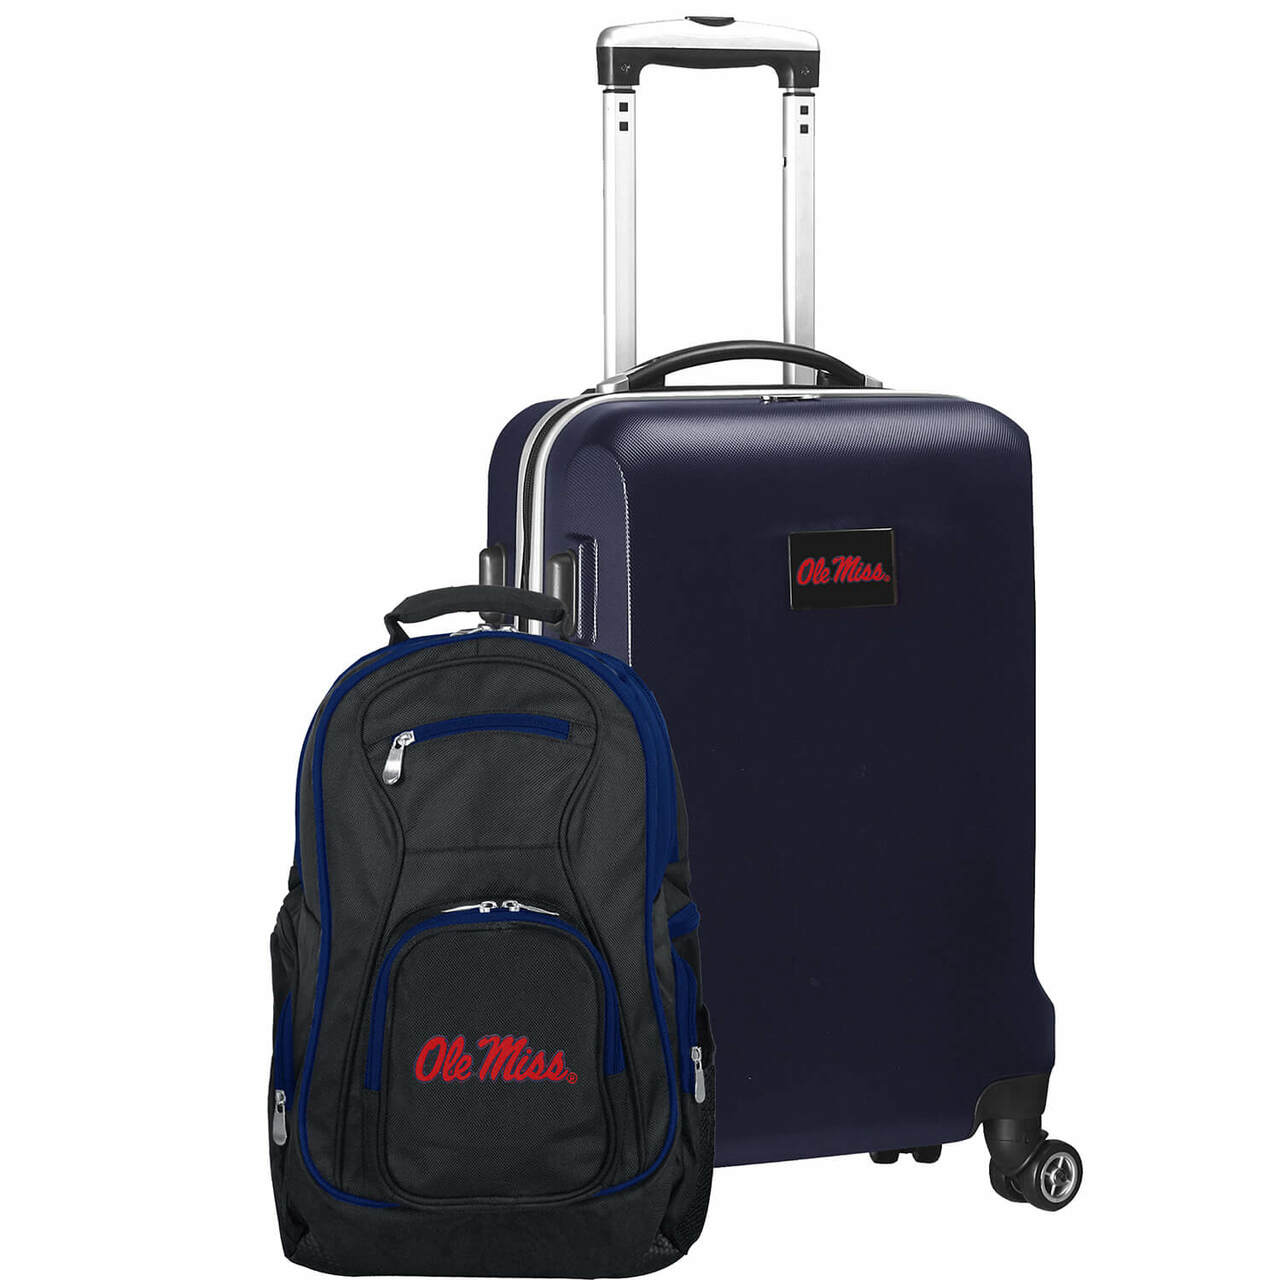 Mississippi Ole Miss Deluxe 2-Piece Backpack and Carry-on Set in Navy